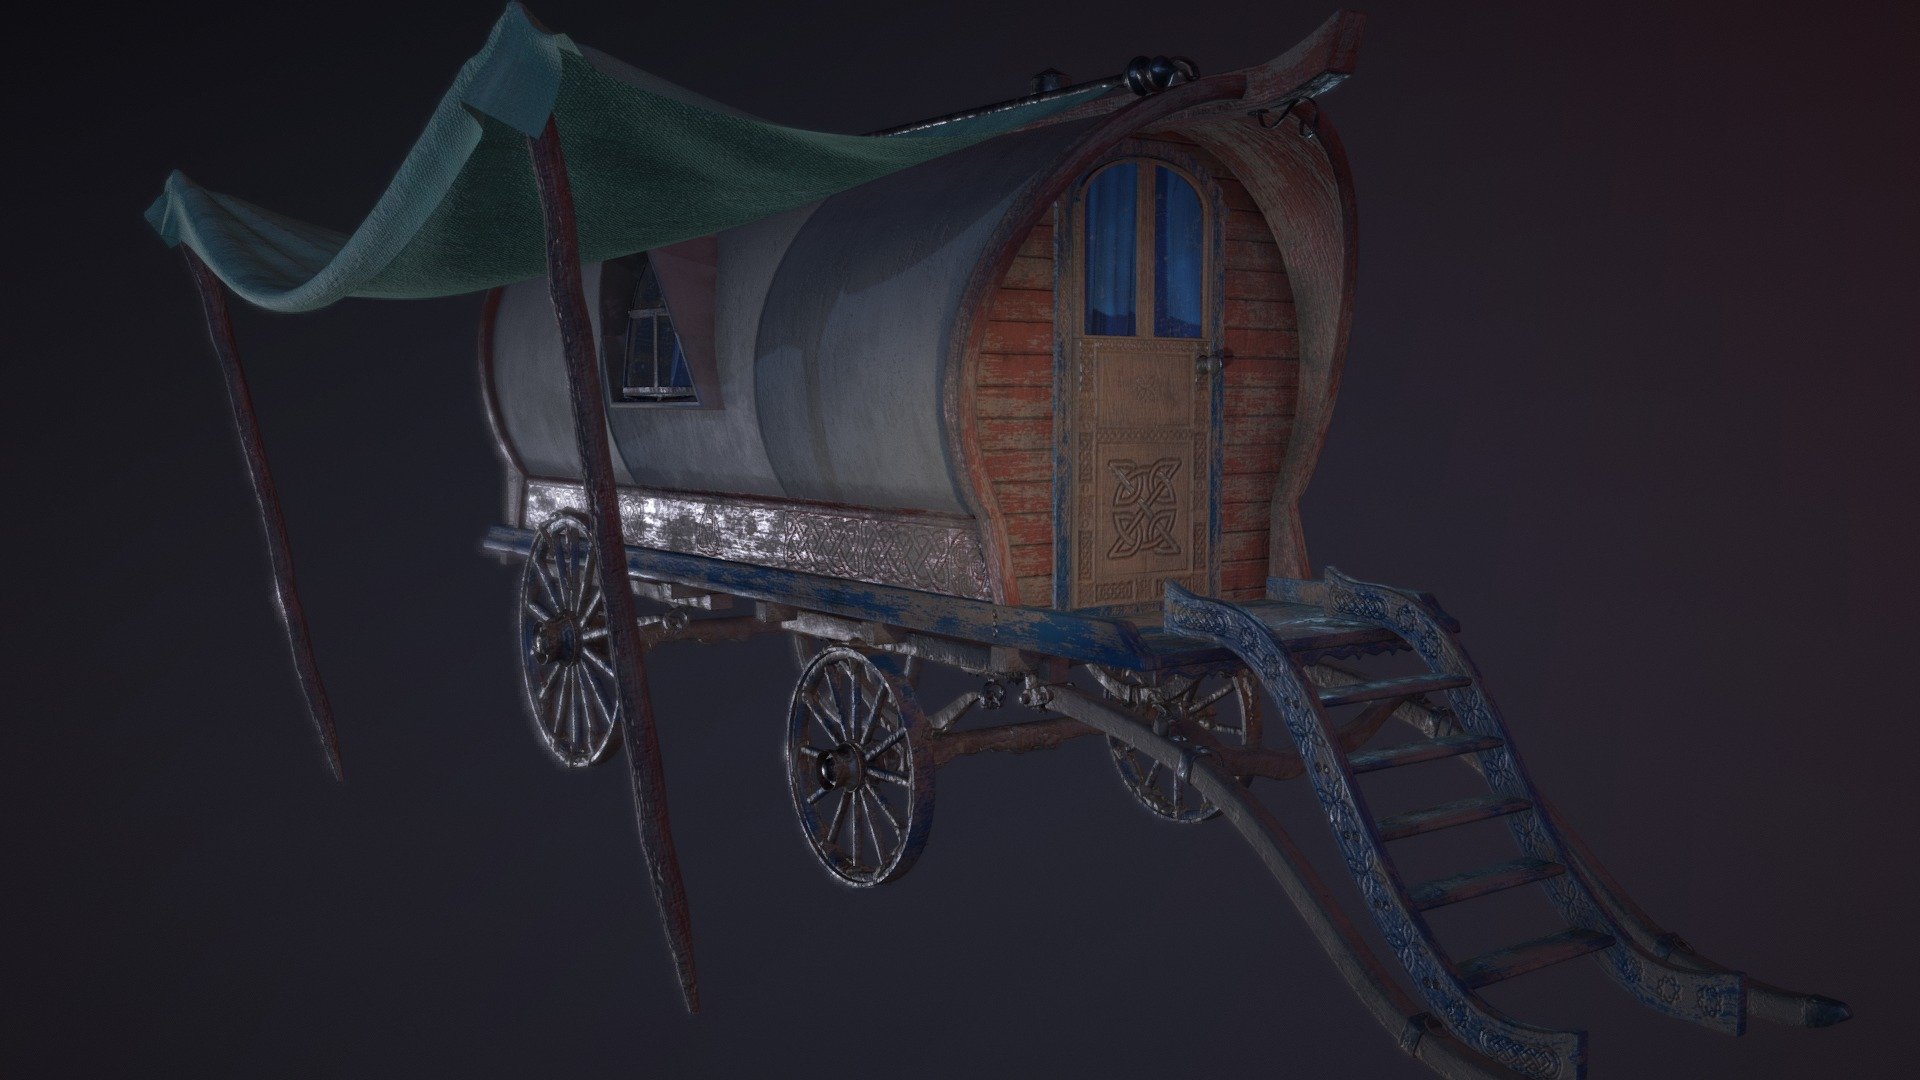 The key asset for my diploma project. Made in 3dsmax, with the exception of mud on the wheels which also went through Zbrush. I tried following Matthias Wagners's breakdown: https://www.artstation.com/artwork/PRlbn (with admittedly less success but we live and we learn!). Textured in Substance Painter with the base mud material coming from Designer.
I had to reduce the texture size for the upload, so close-ups may appear to be blurrier than originally intended! - Caravan - 3D model by Valeria Gerontopoulos (@vgerontopoulos) 3d model